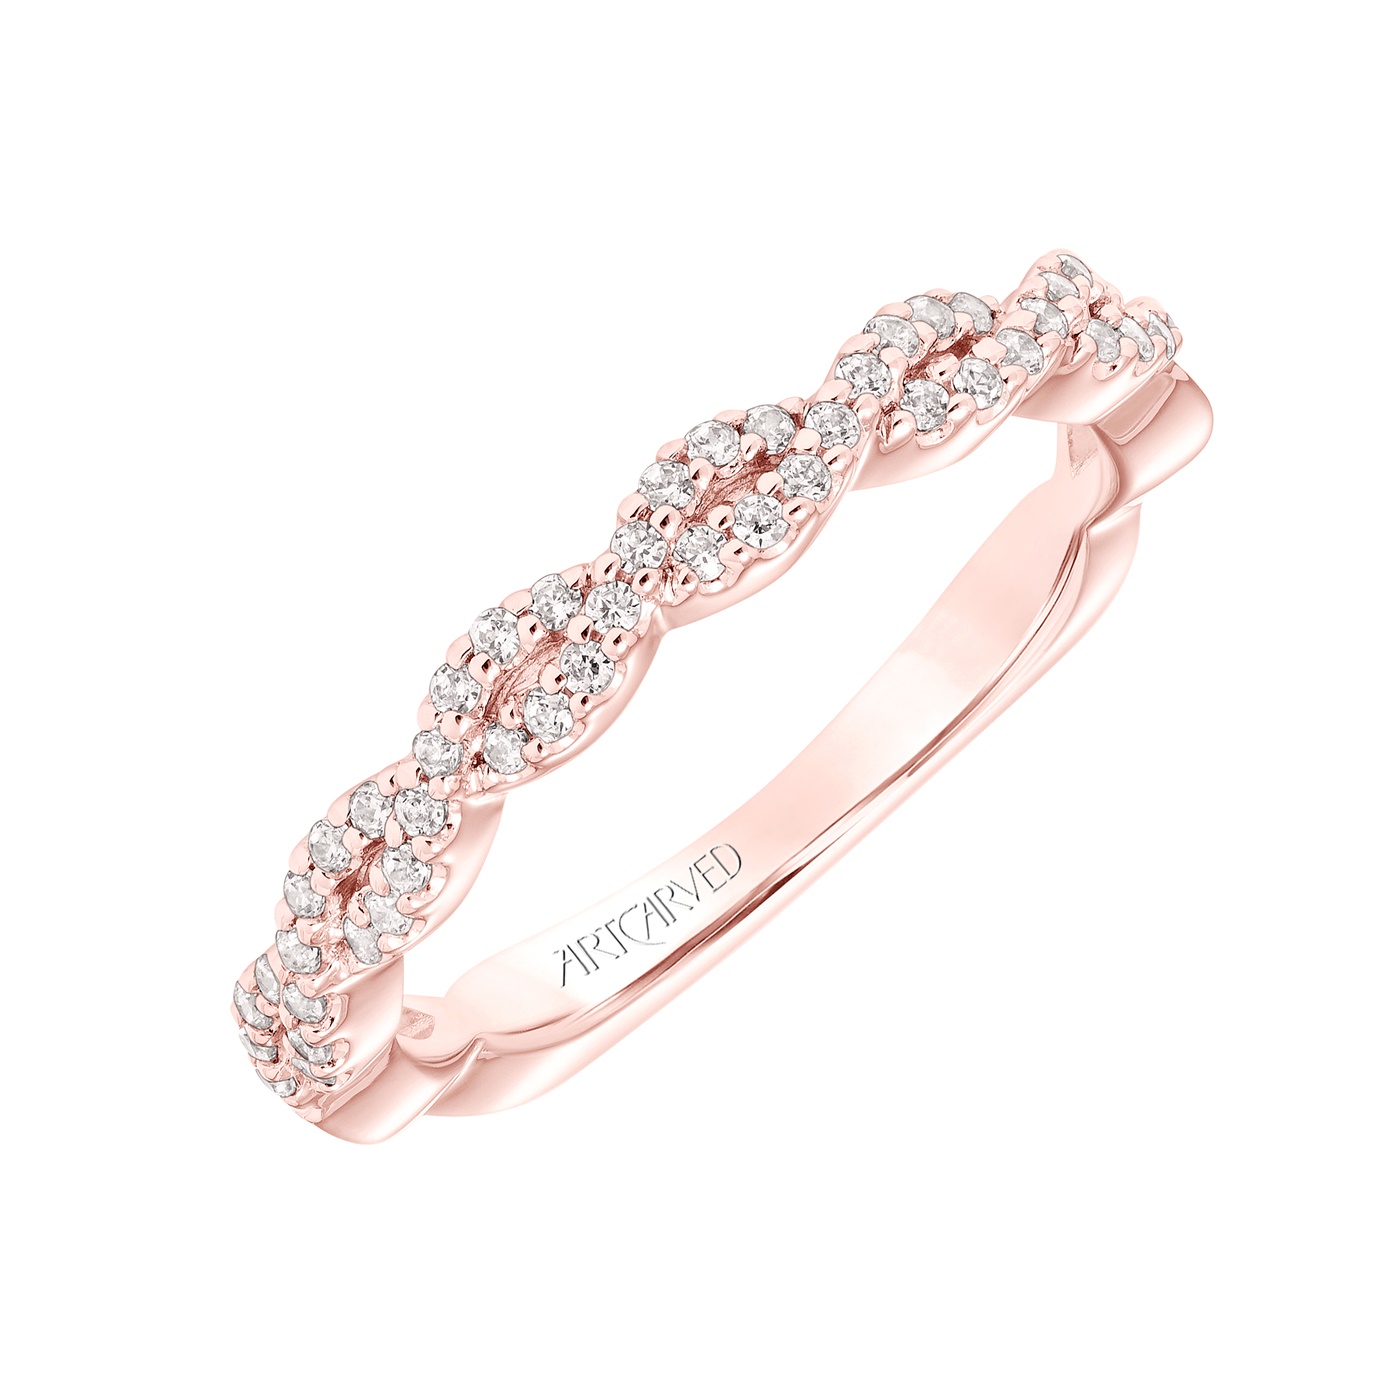 14kt Rose Gold and Diamond Braided Wedding Band by ArtCarved